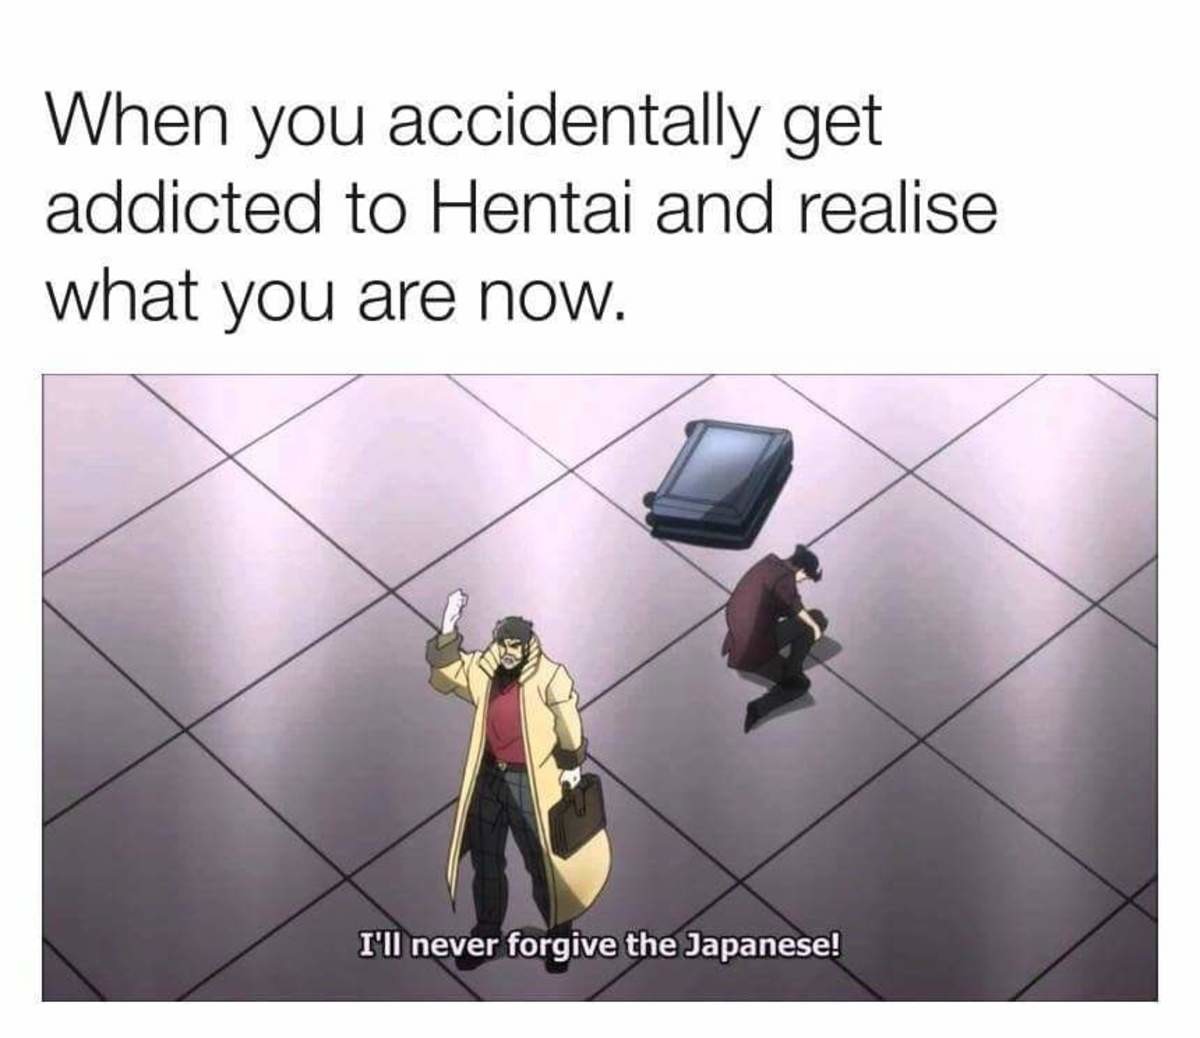 They Did This To Me. join list: LewdListings (1726 subs)Mention History. 1/ hen you accidentally get to realise I' ll never forgive the Japanese!. welcome, appreciation hentai is never engouh. japanese virgins take fall onto this trap two. butt you are all should be grateful of the glorify hentai big breas